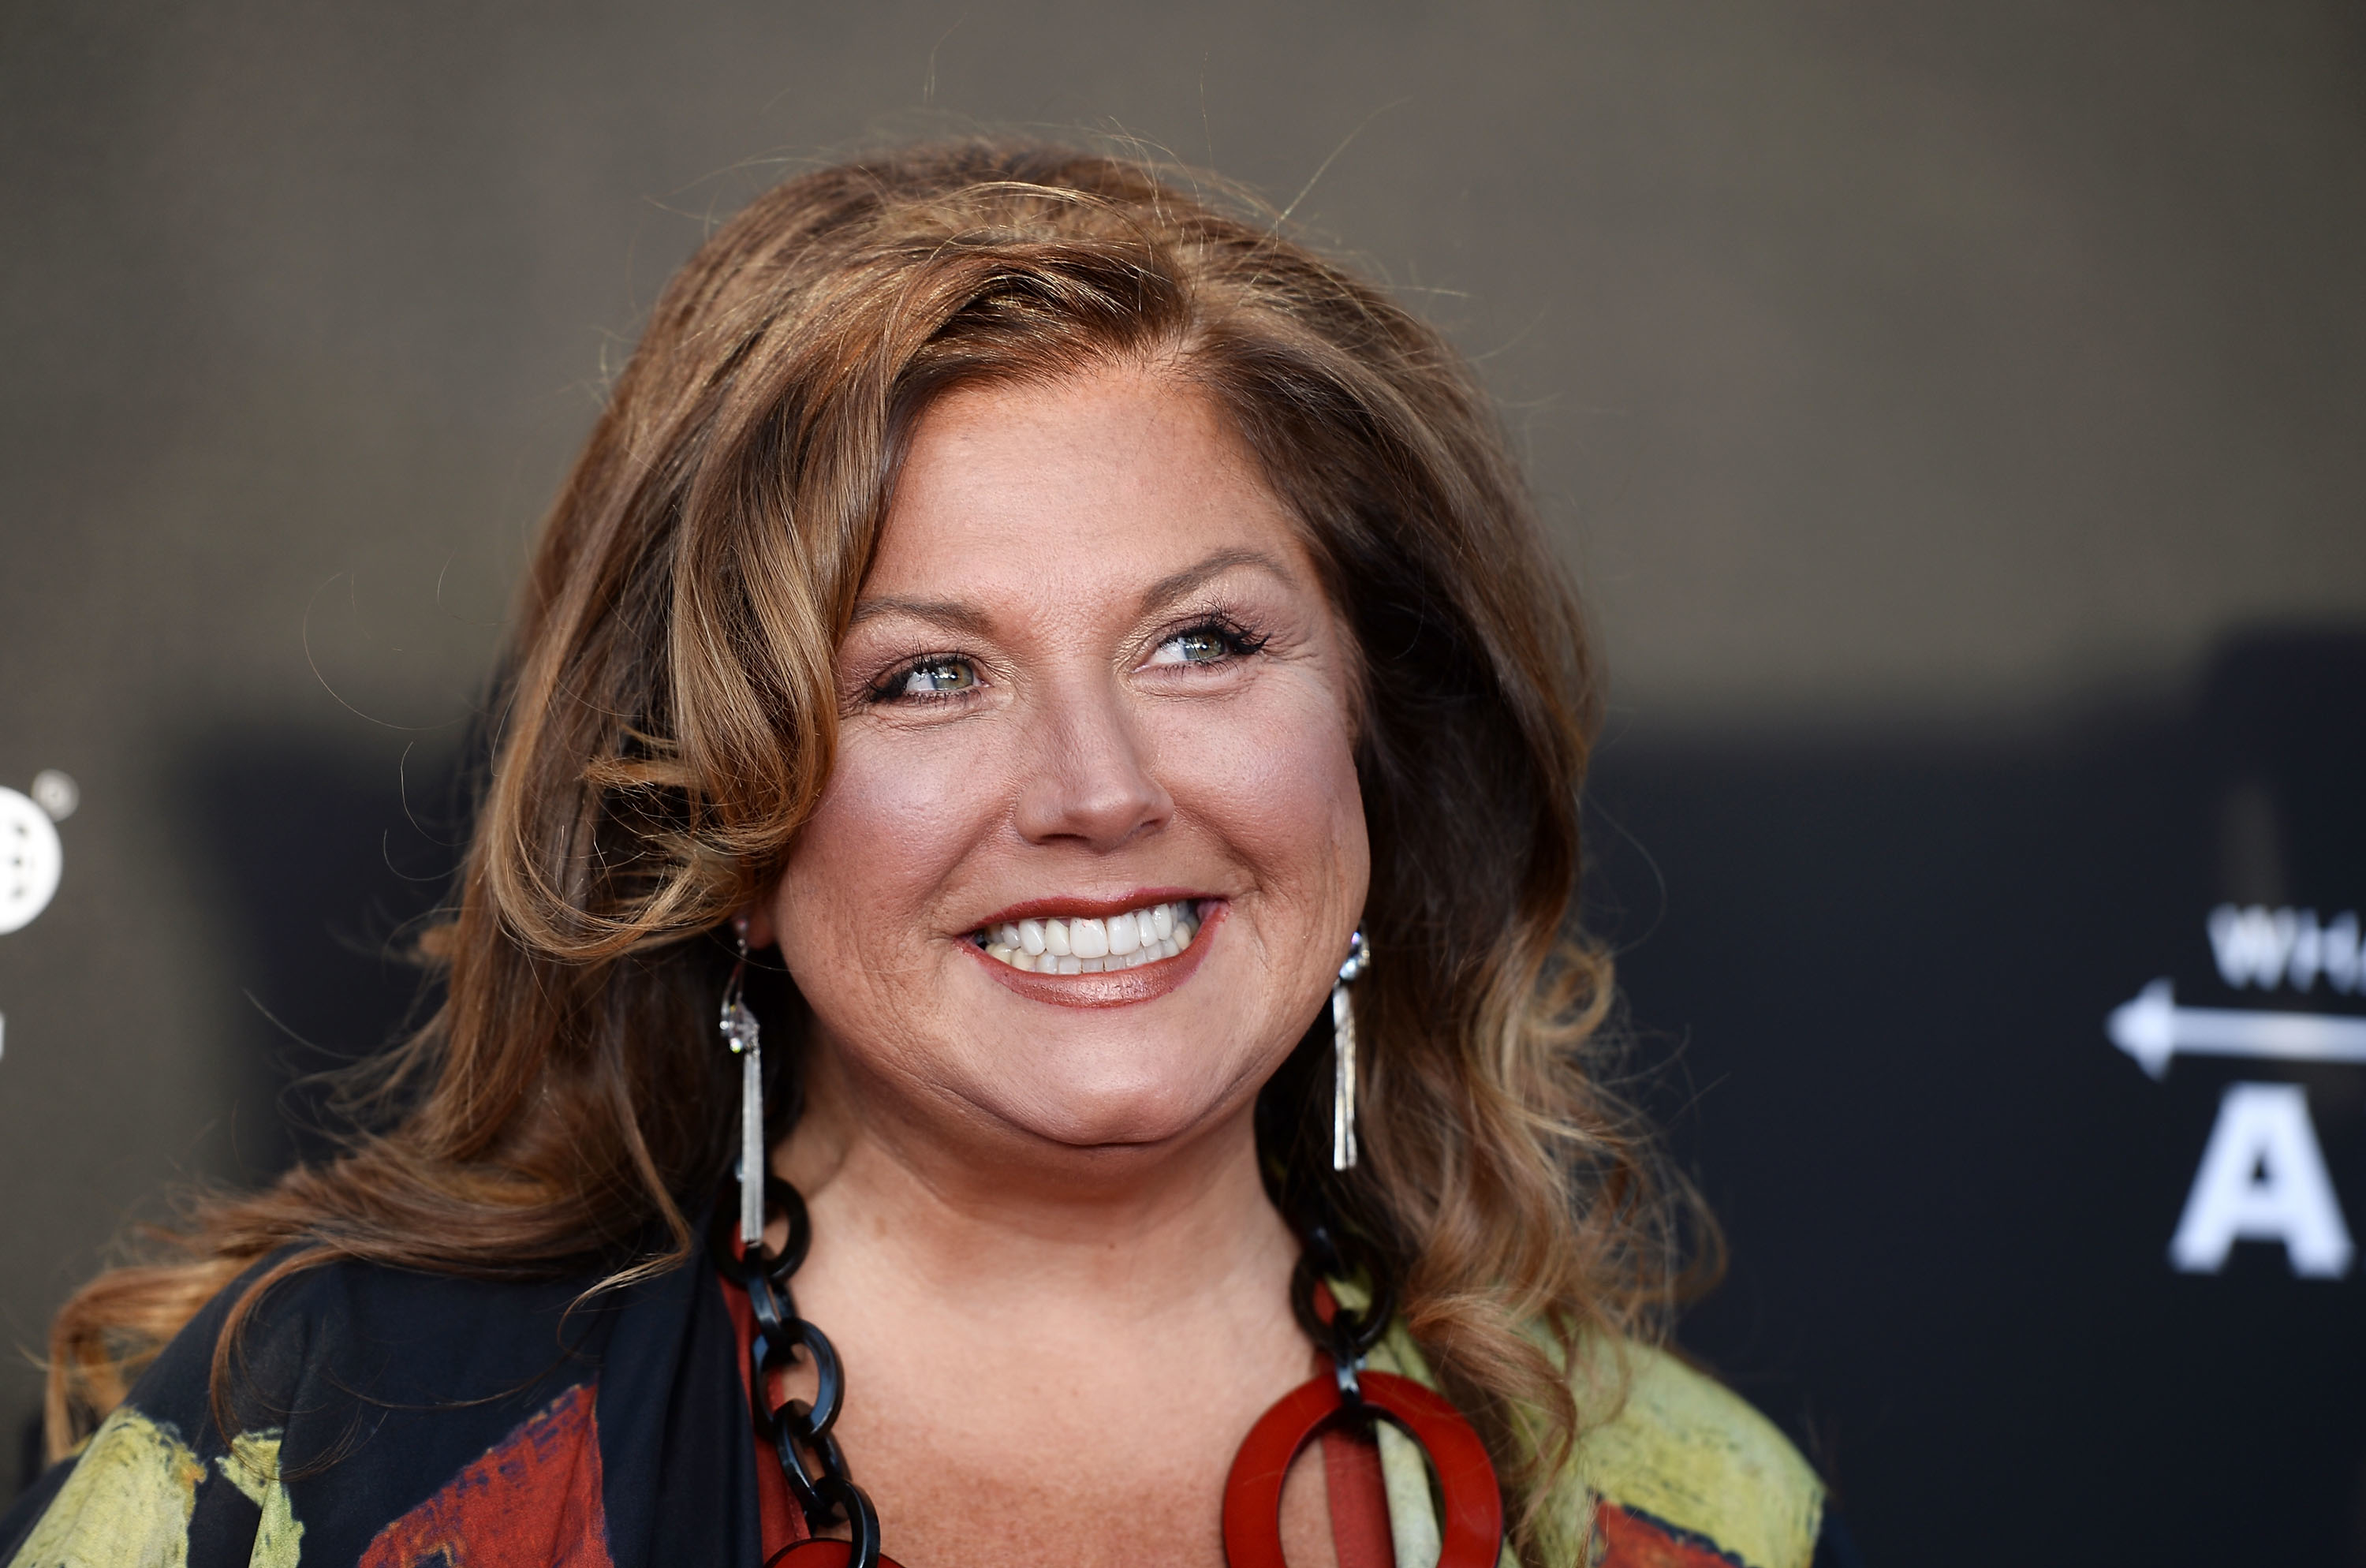 Abby Lee Miller says she's still into high school football players